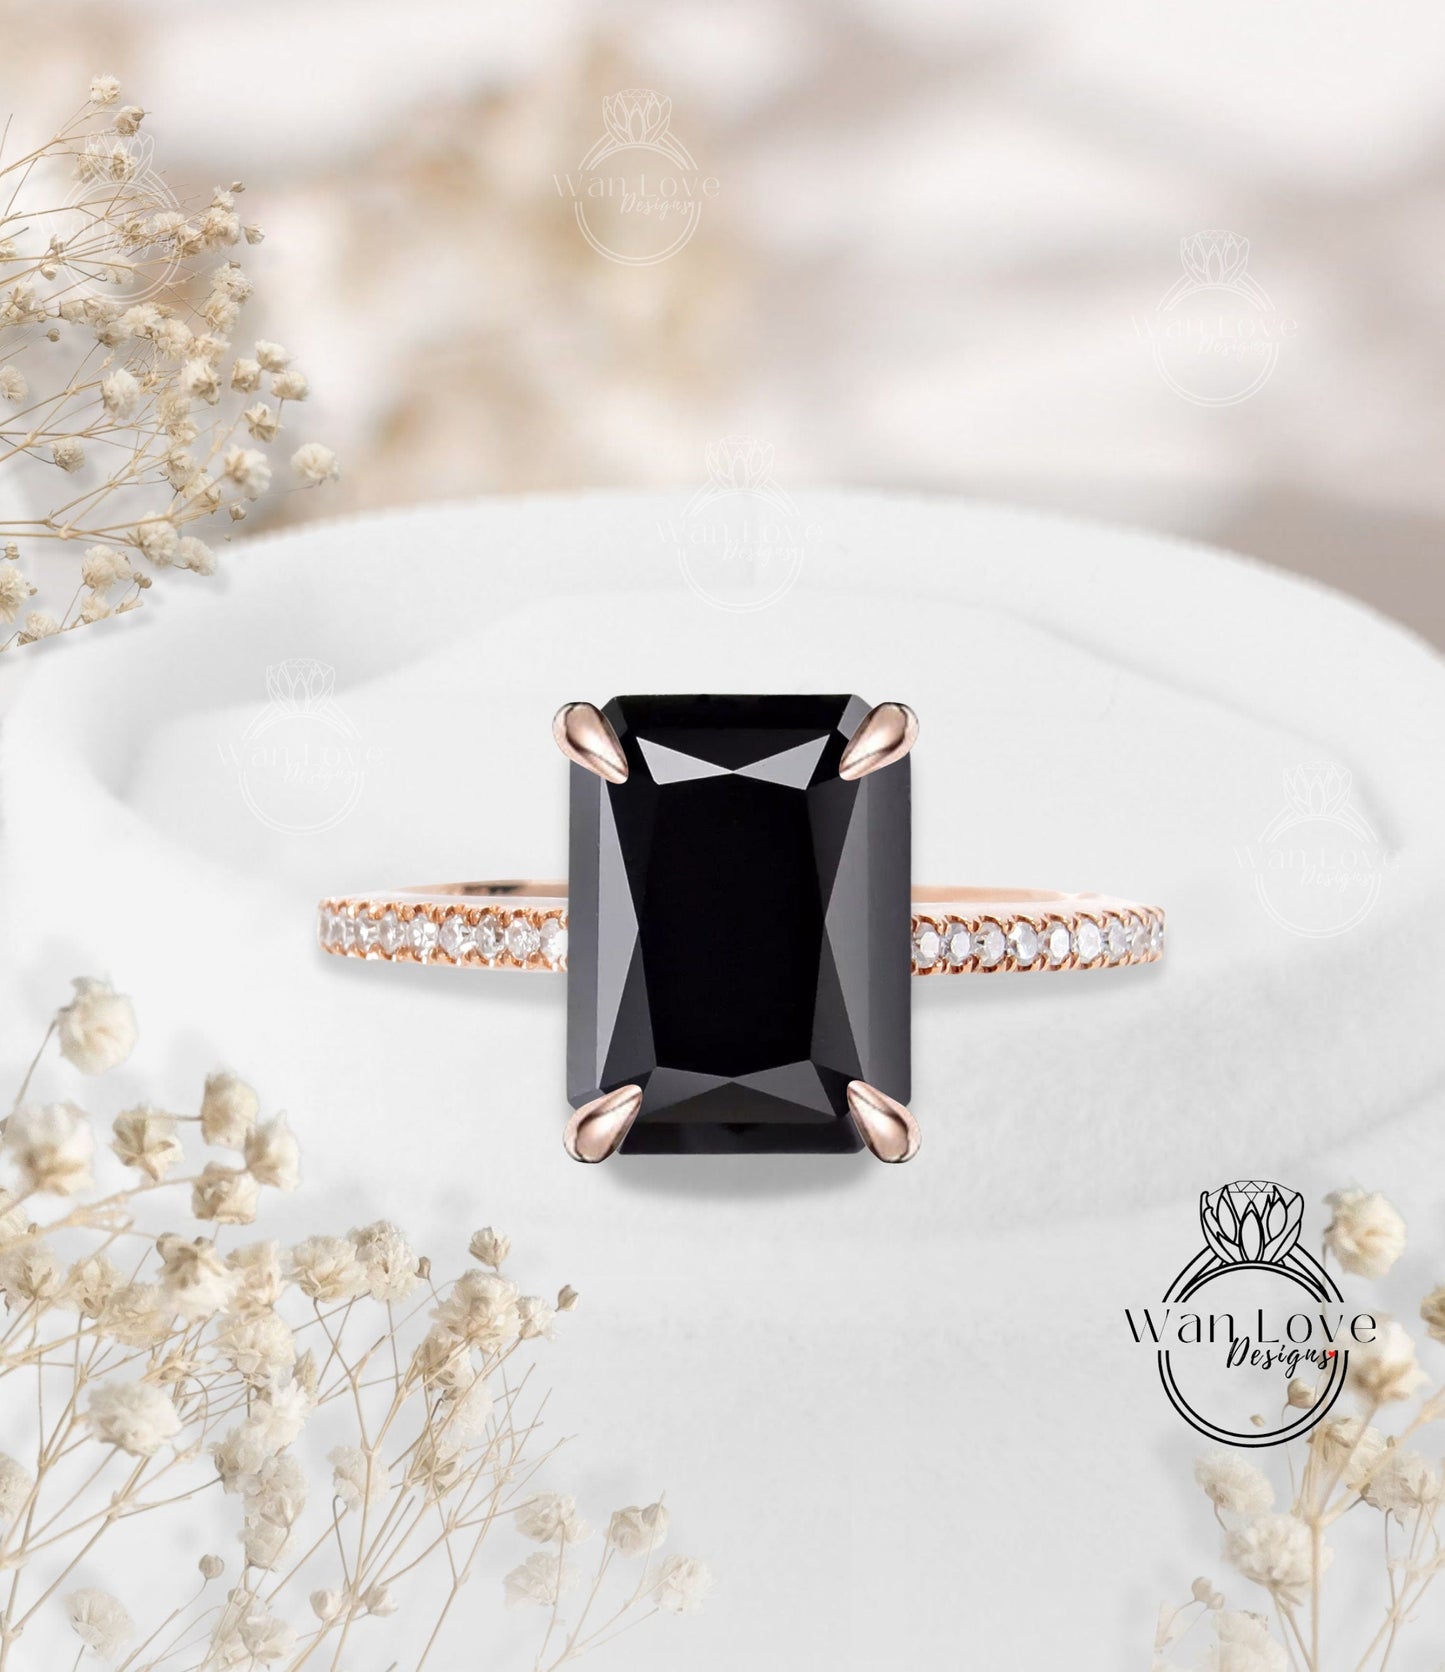 Black Spinel engagement ring vintage ring emerald sapphire rose gold ring solitaire art deco ring bridal wedding ring Anniversary ring gift Wan Love Designs